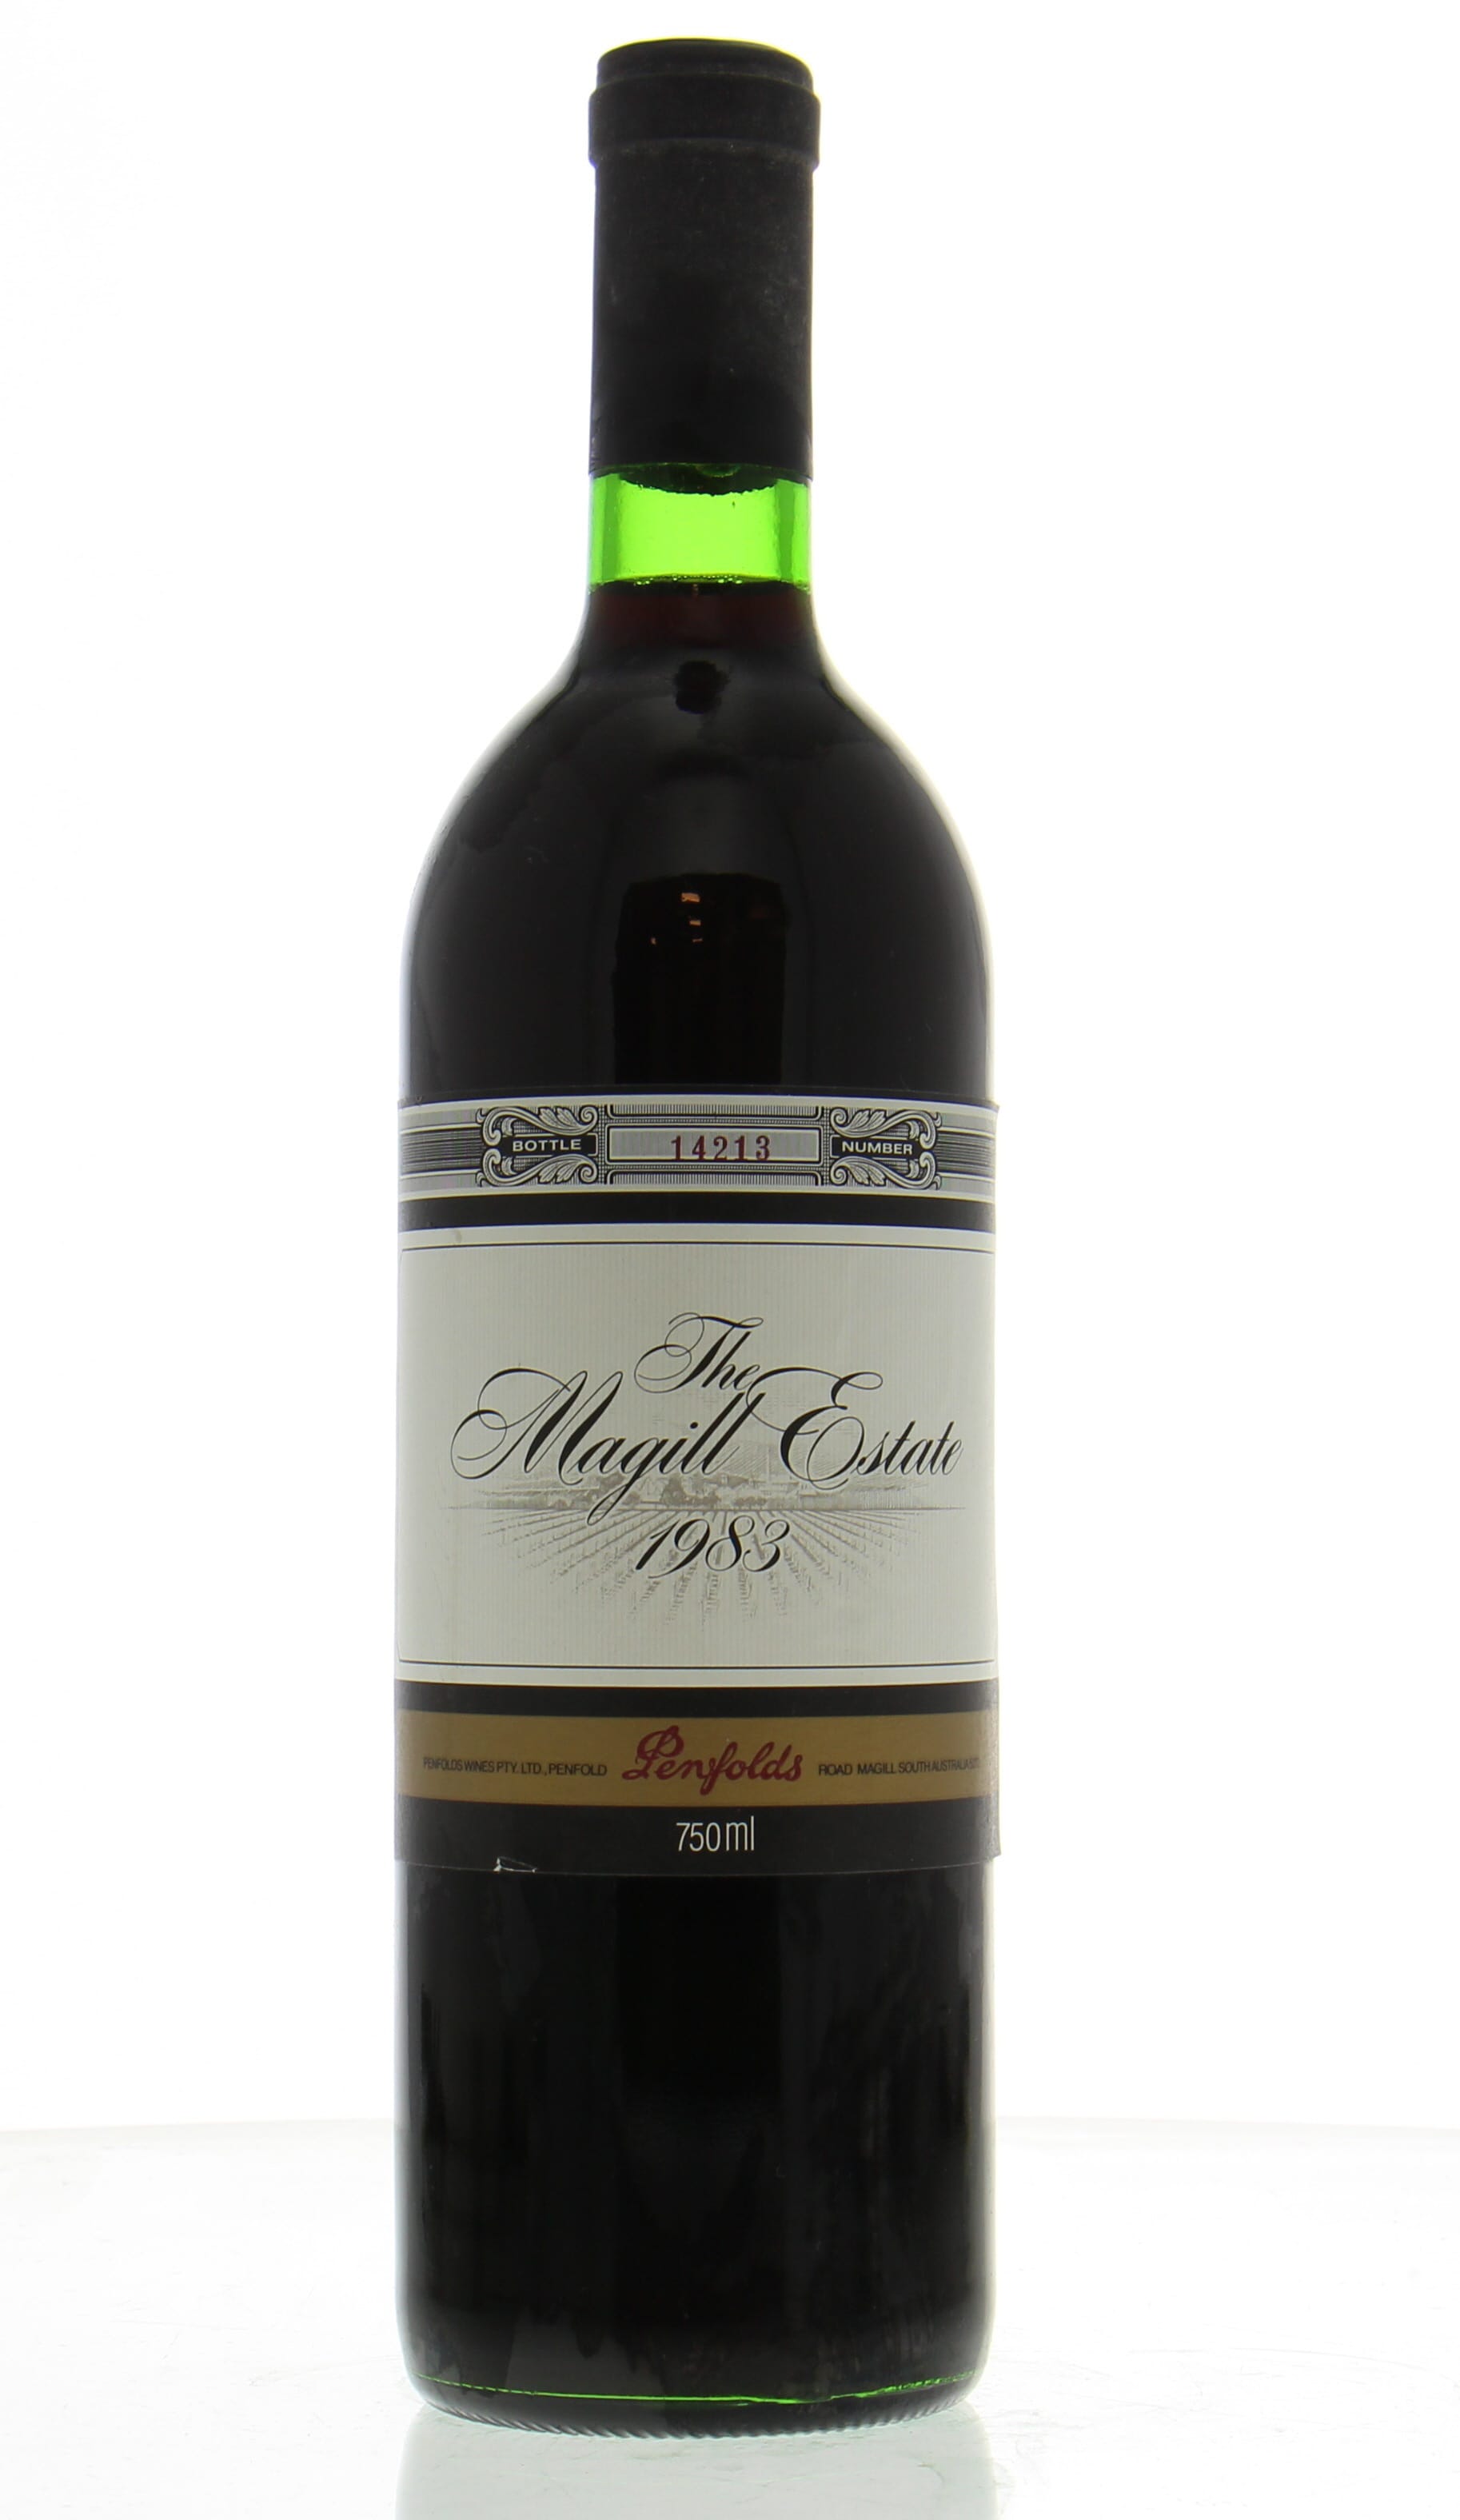 Penfolds - The Magill Estate 1983 Perfect